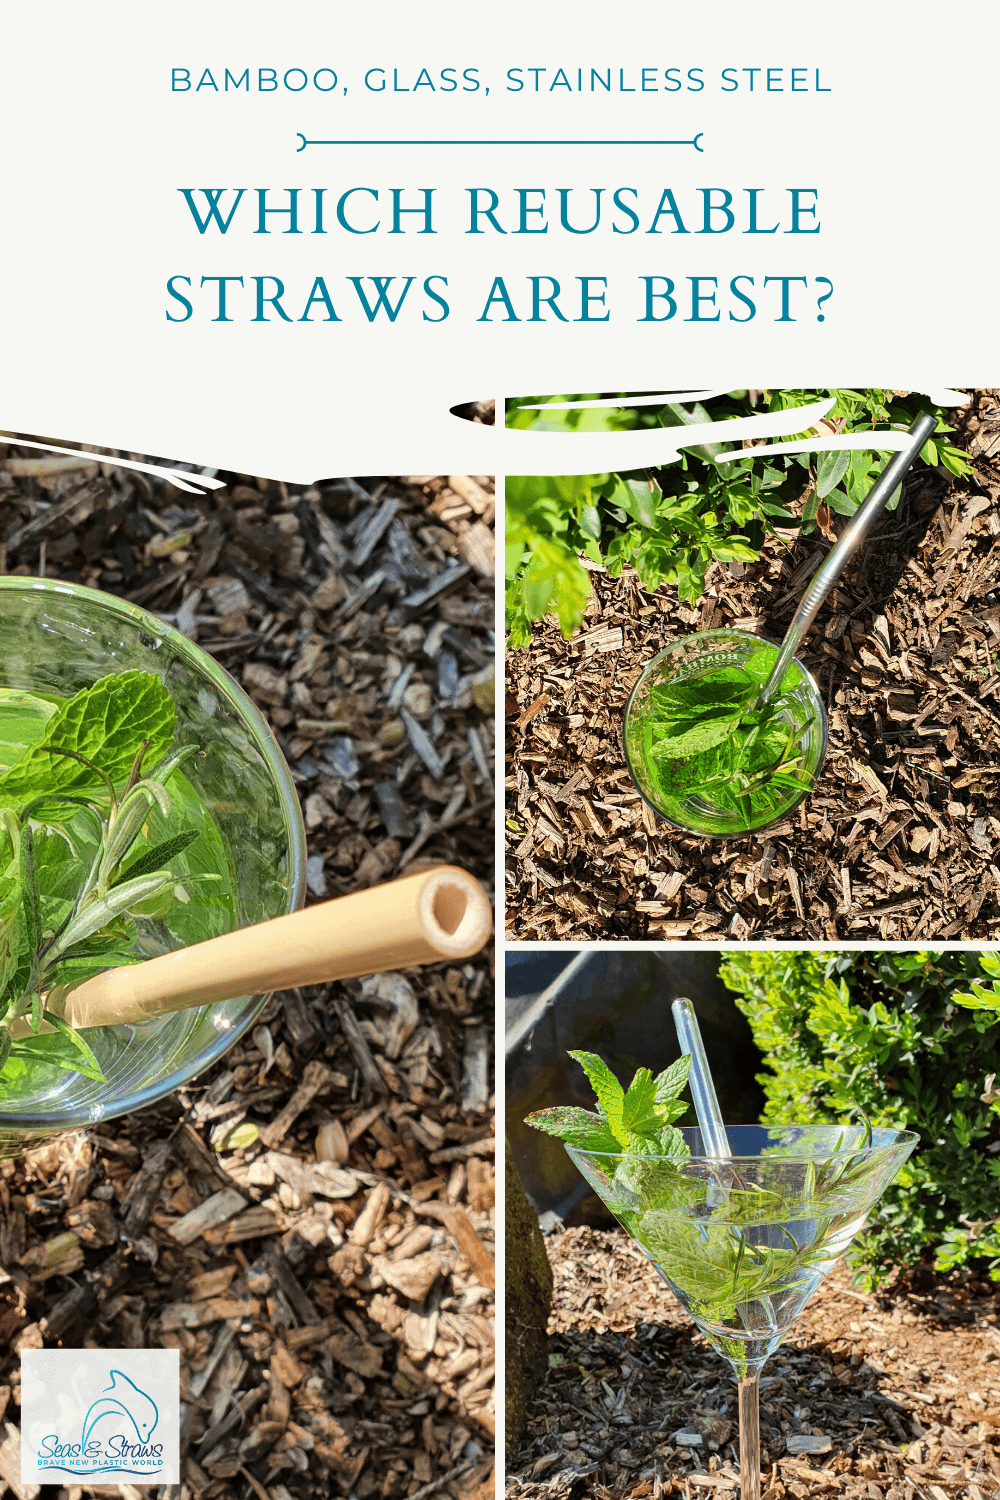 Bamboo, glass or stainless steel - which reusable straws do you prefer? - Seas & Straws